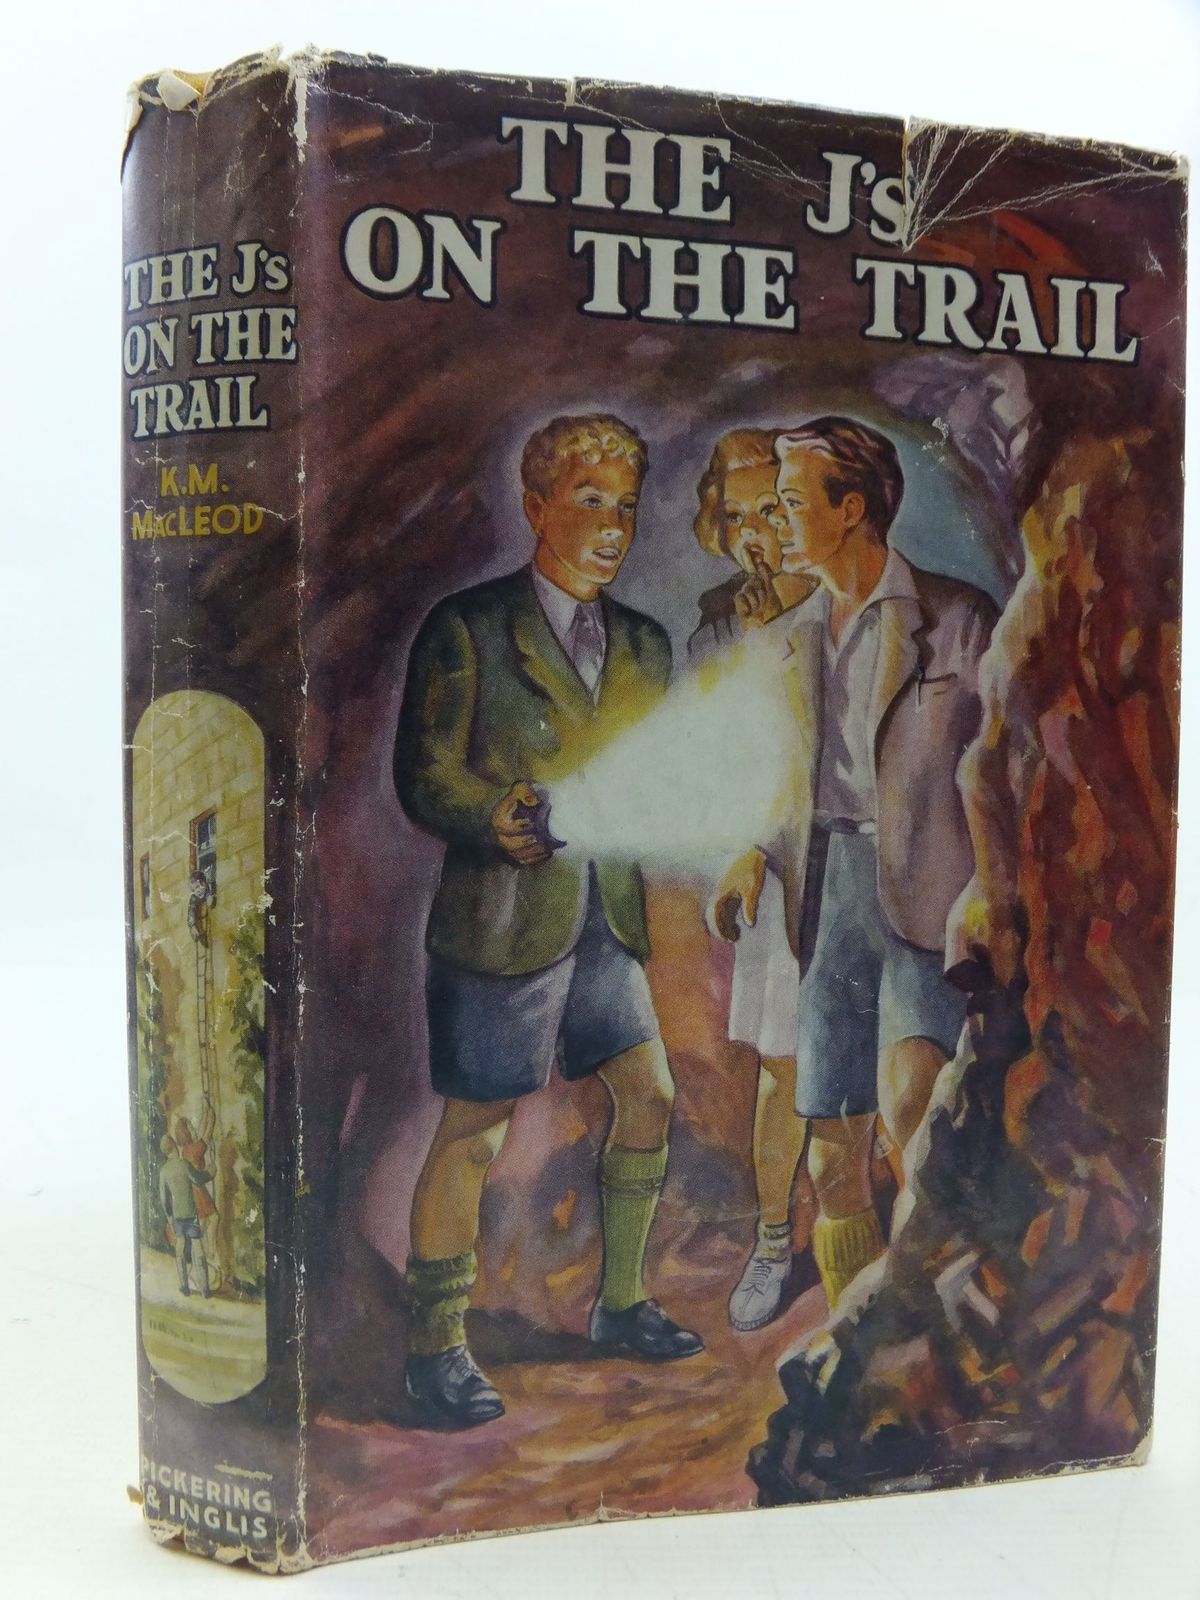 Cover of THE J'S ON THE TRAIL by K.M. Macleod